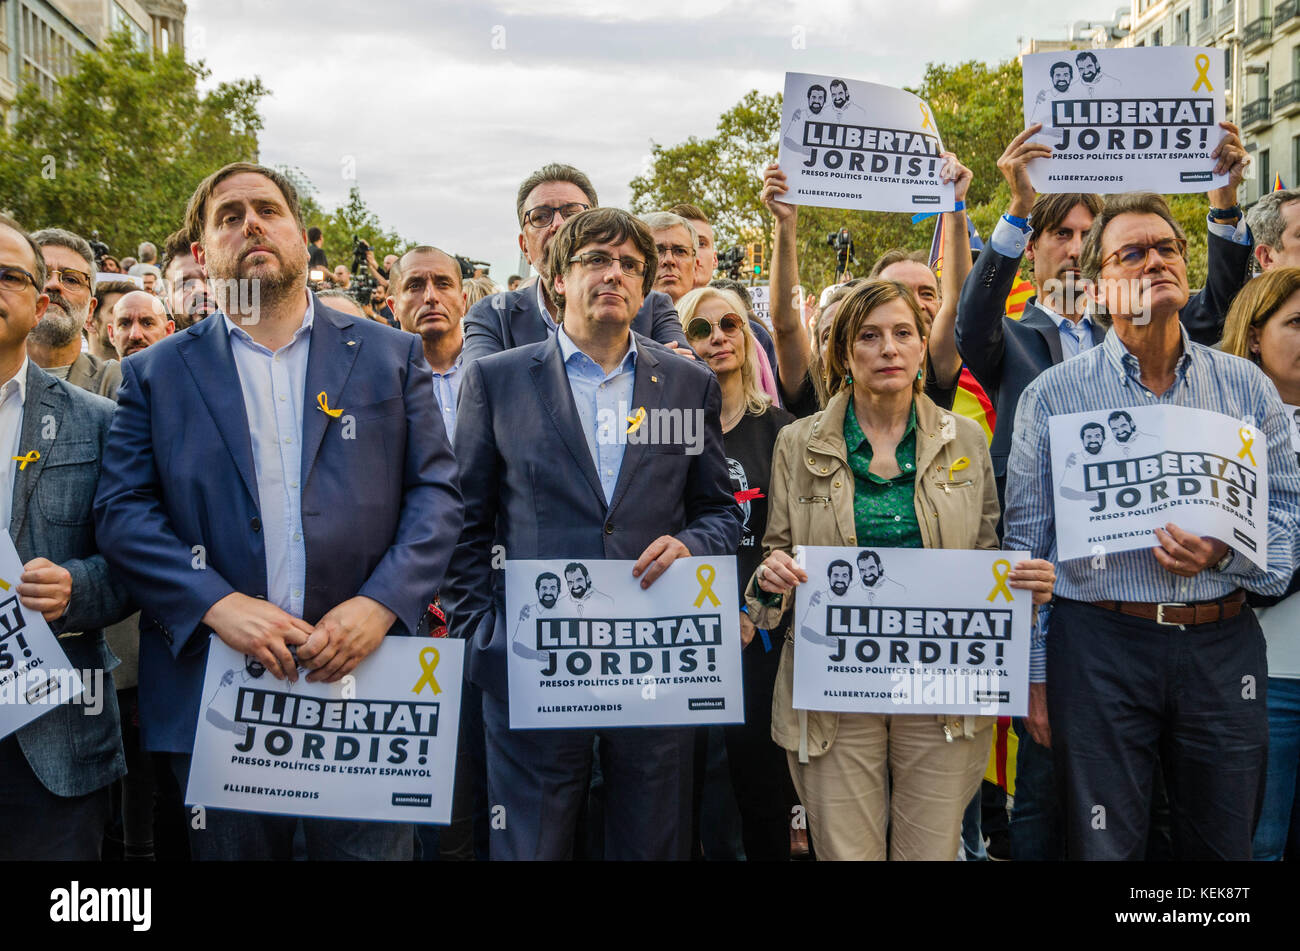 Barcelona, Catalonia, Spain. 21st Oct, 2017. From the left, Oriol Junqueras, Carles Puigdemont, Carme Forcadell and Artud Mas, occupy the first row of the demonstration in front of the stage. About 450,000 people have been focused to support the Government and the Catalan institutions in the Paseo de Gracia. In less than a week the Spanish Government will deploy 155 of the Spanish Constitution article Credit: Copyright Paco Freire/SOPA/ZUMA Wire/Alamy Live News Stock Photo